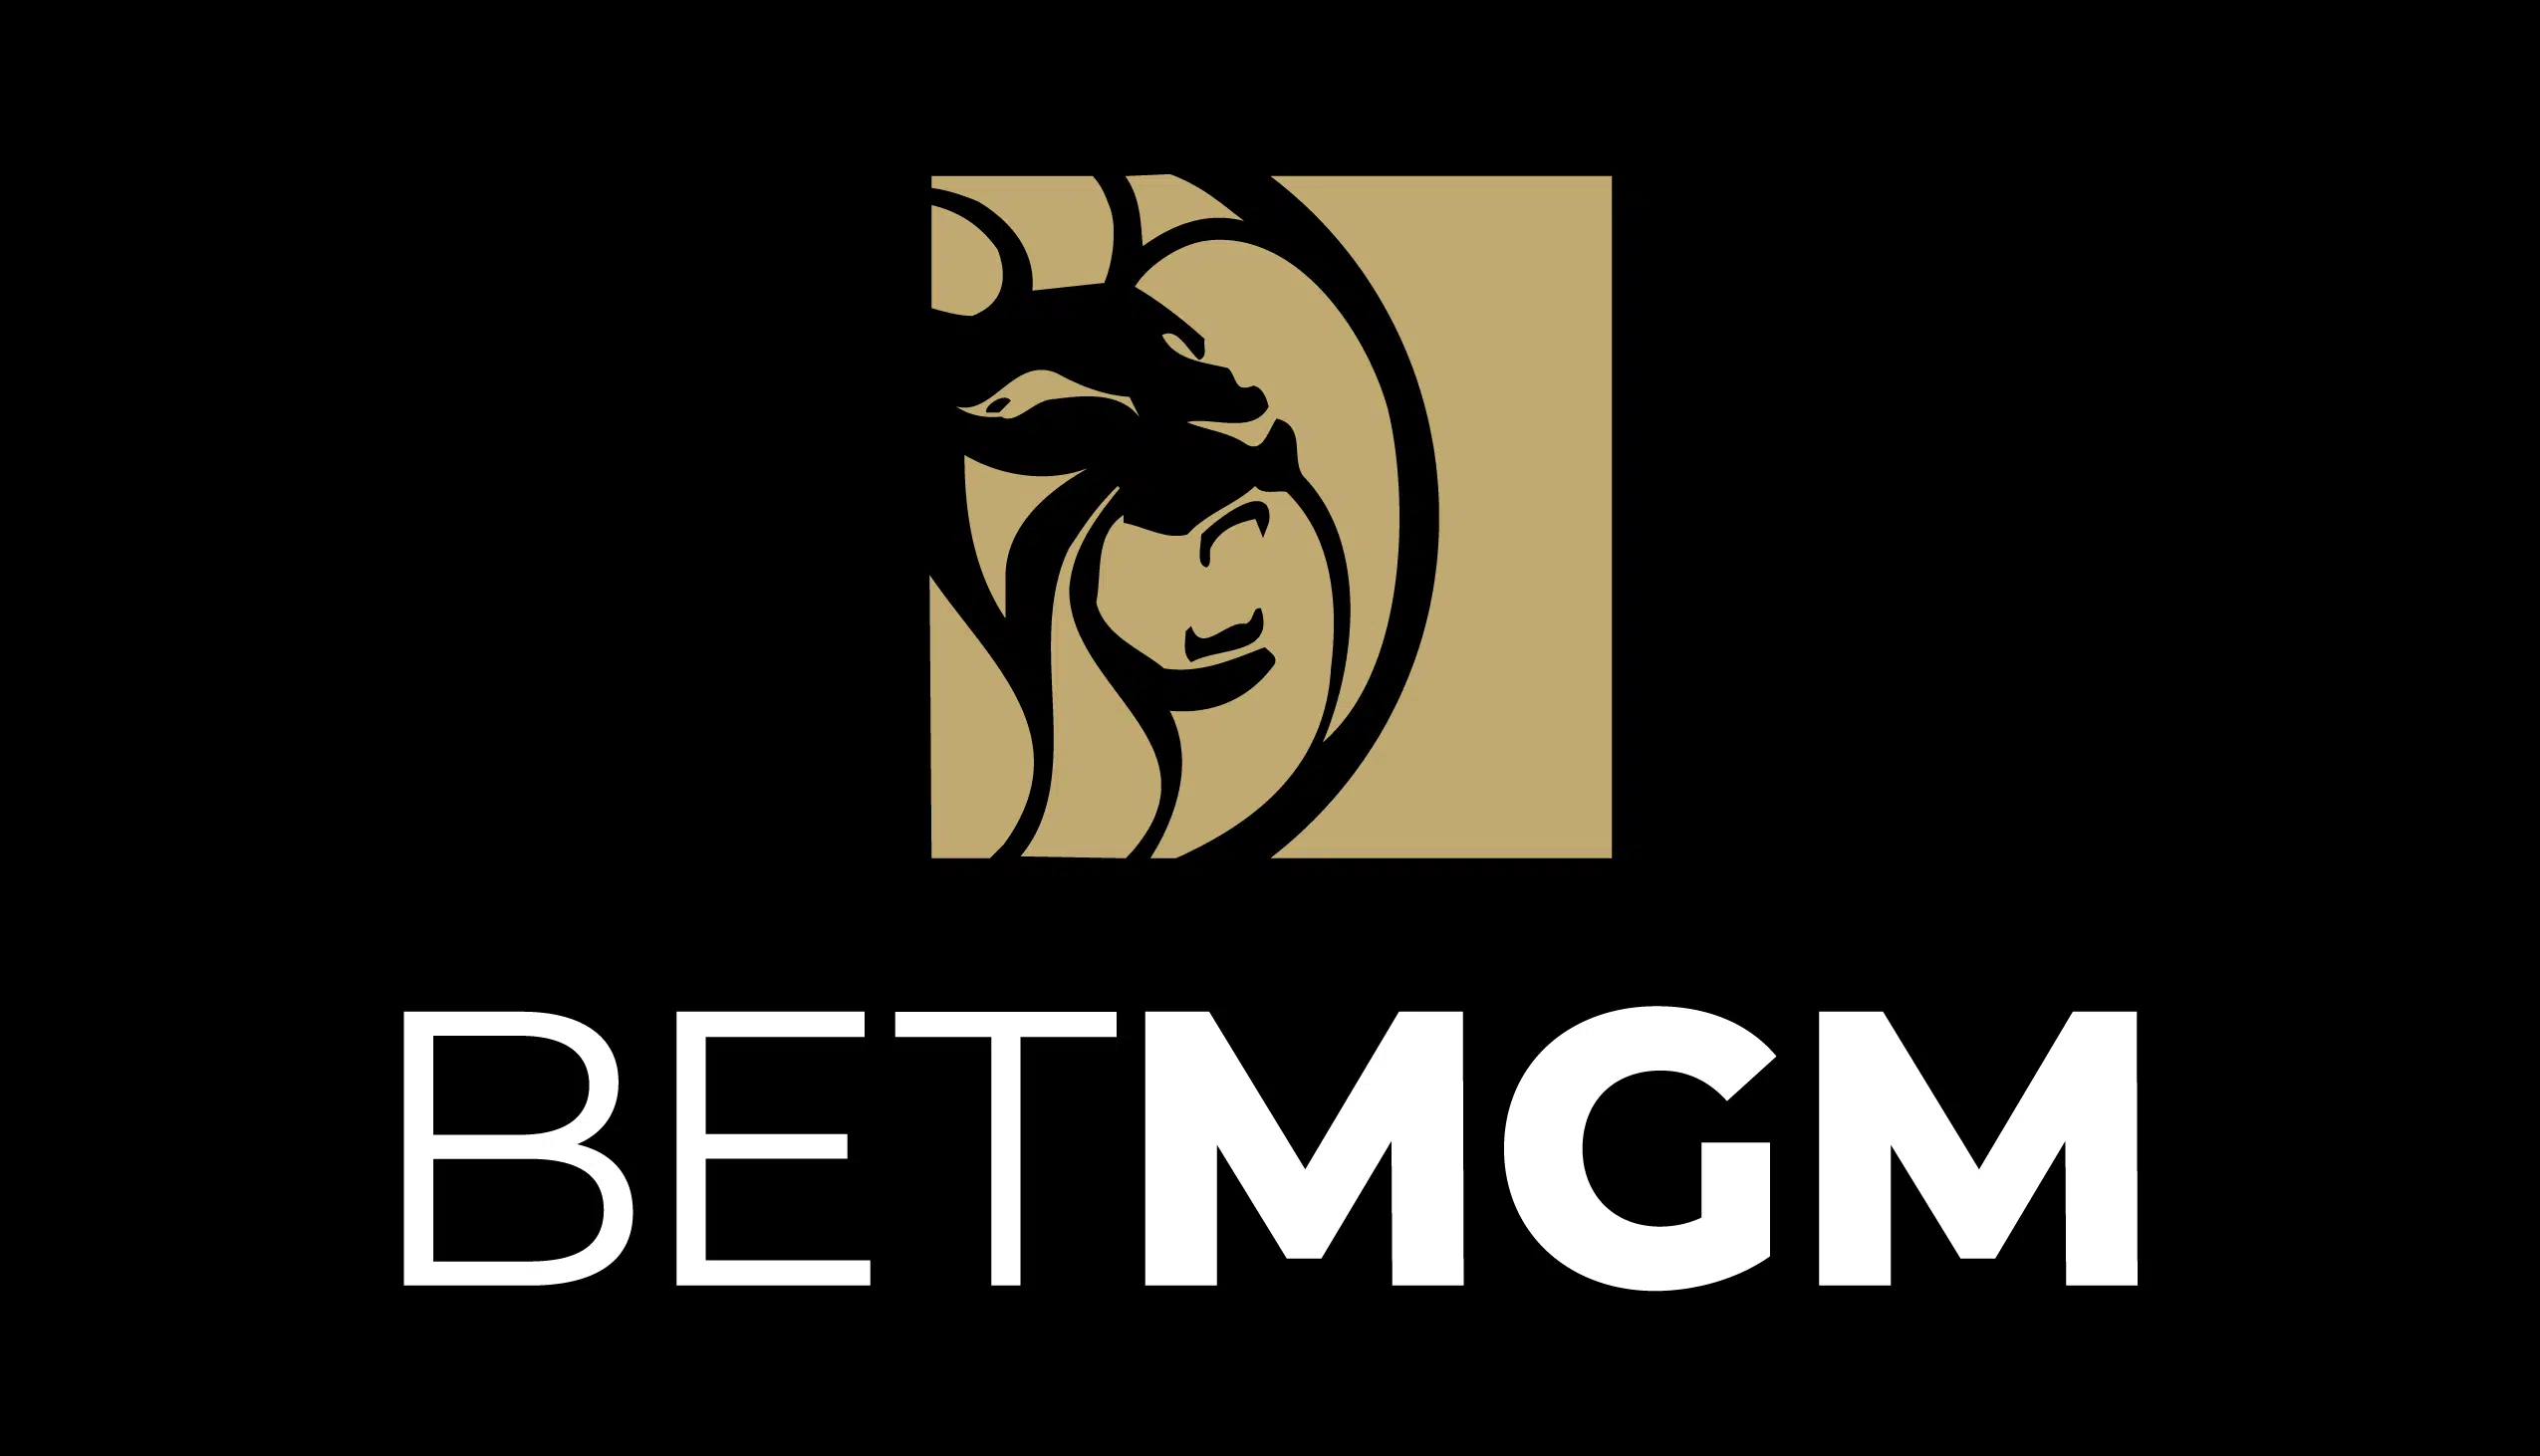 BetMGM versus the Rivals Which Platform Suits You Best